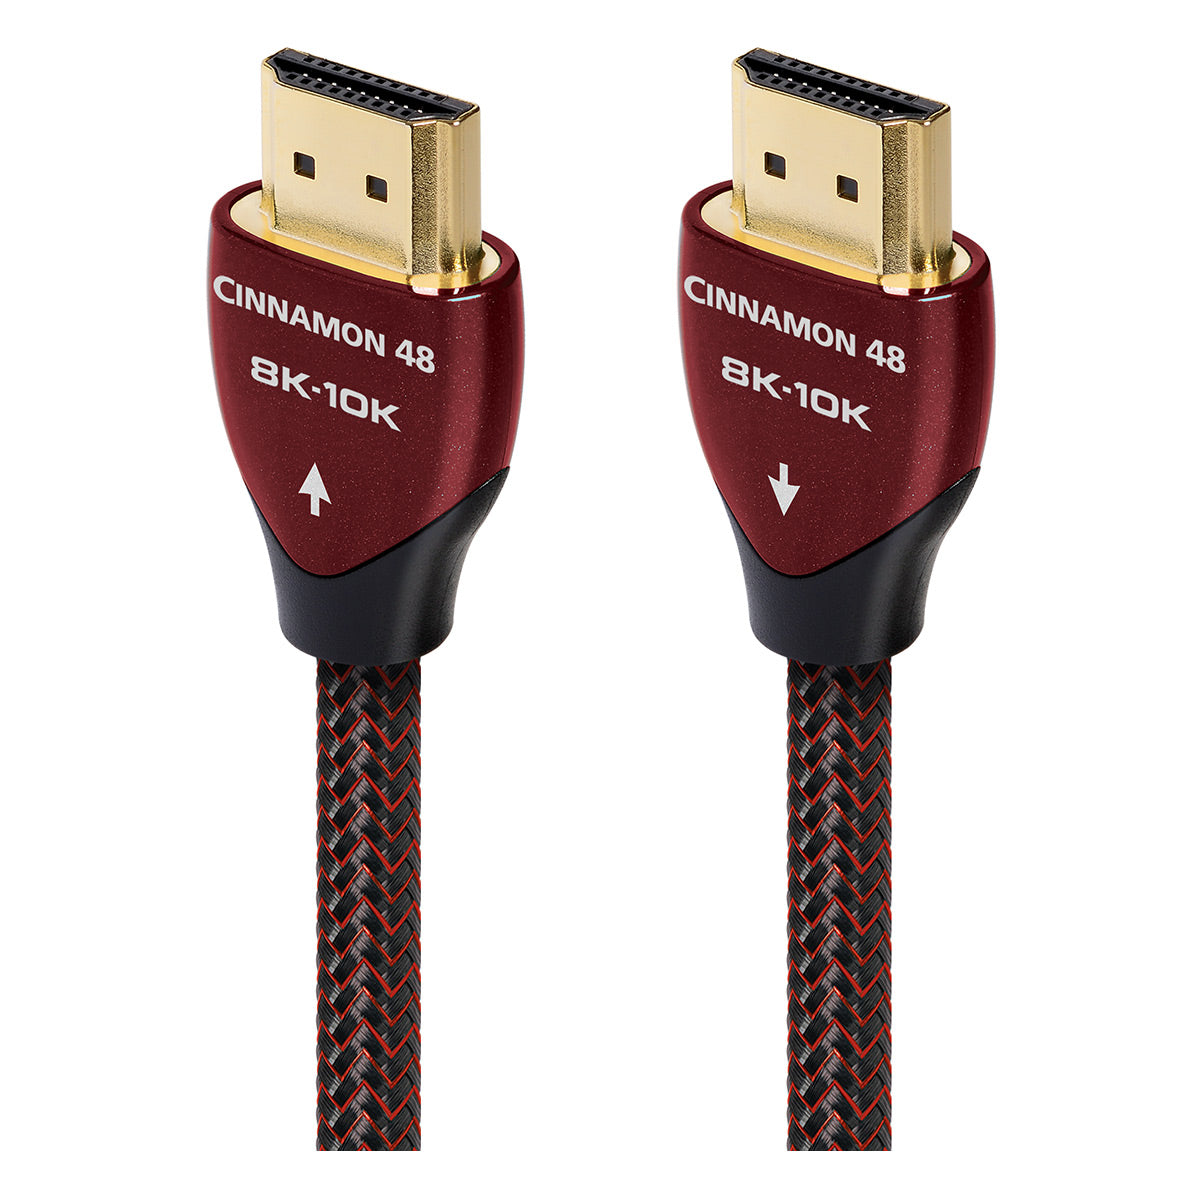 AudioQuest Cinnamon 48 8K-10K 48Gbps Ultra High Speed HDMI Cable - 7.38 ft. (2.25m)